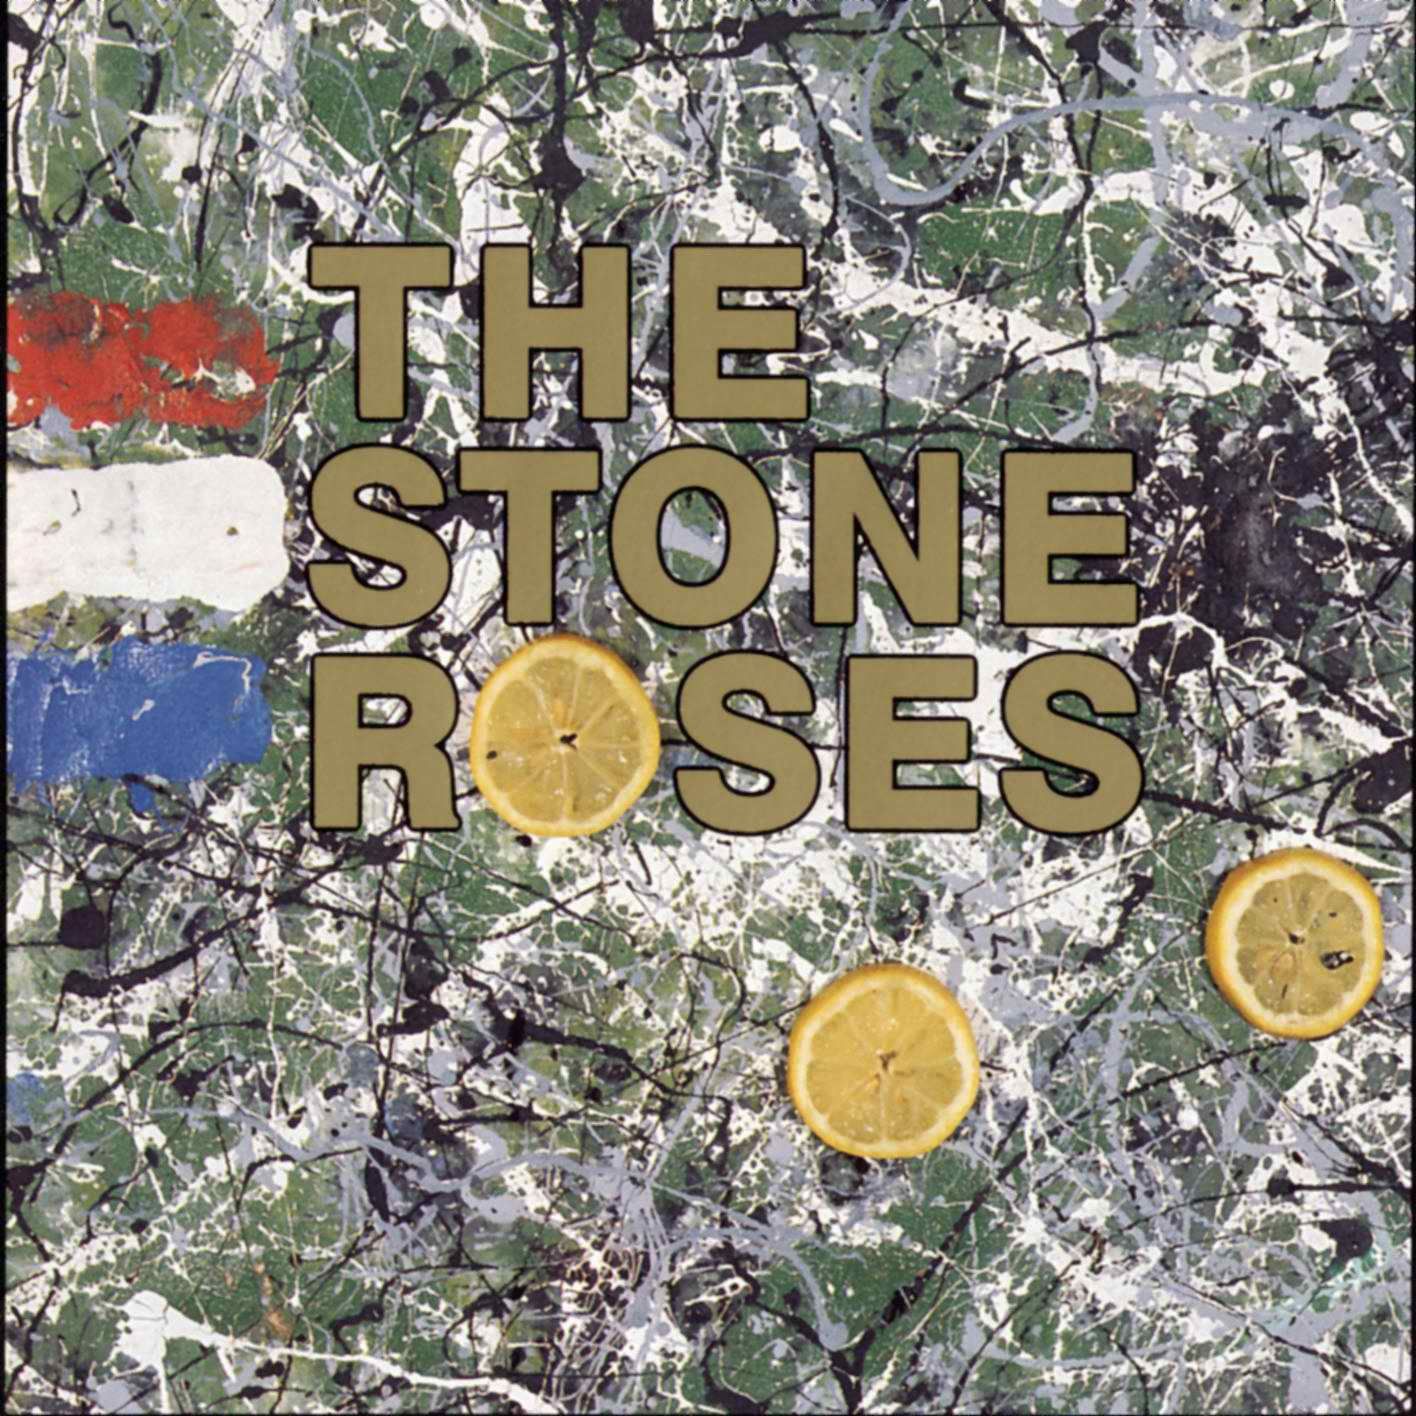 /uploads/tad/430_The-Almost-Daily_stone-roses.jpeg